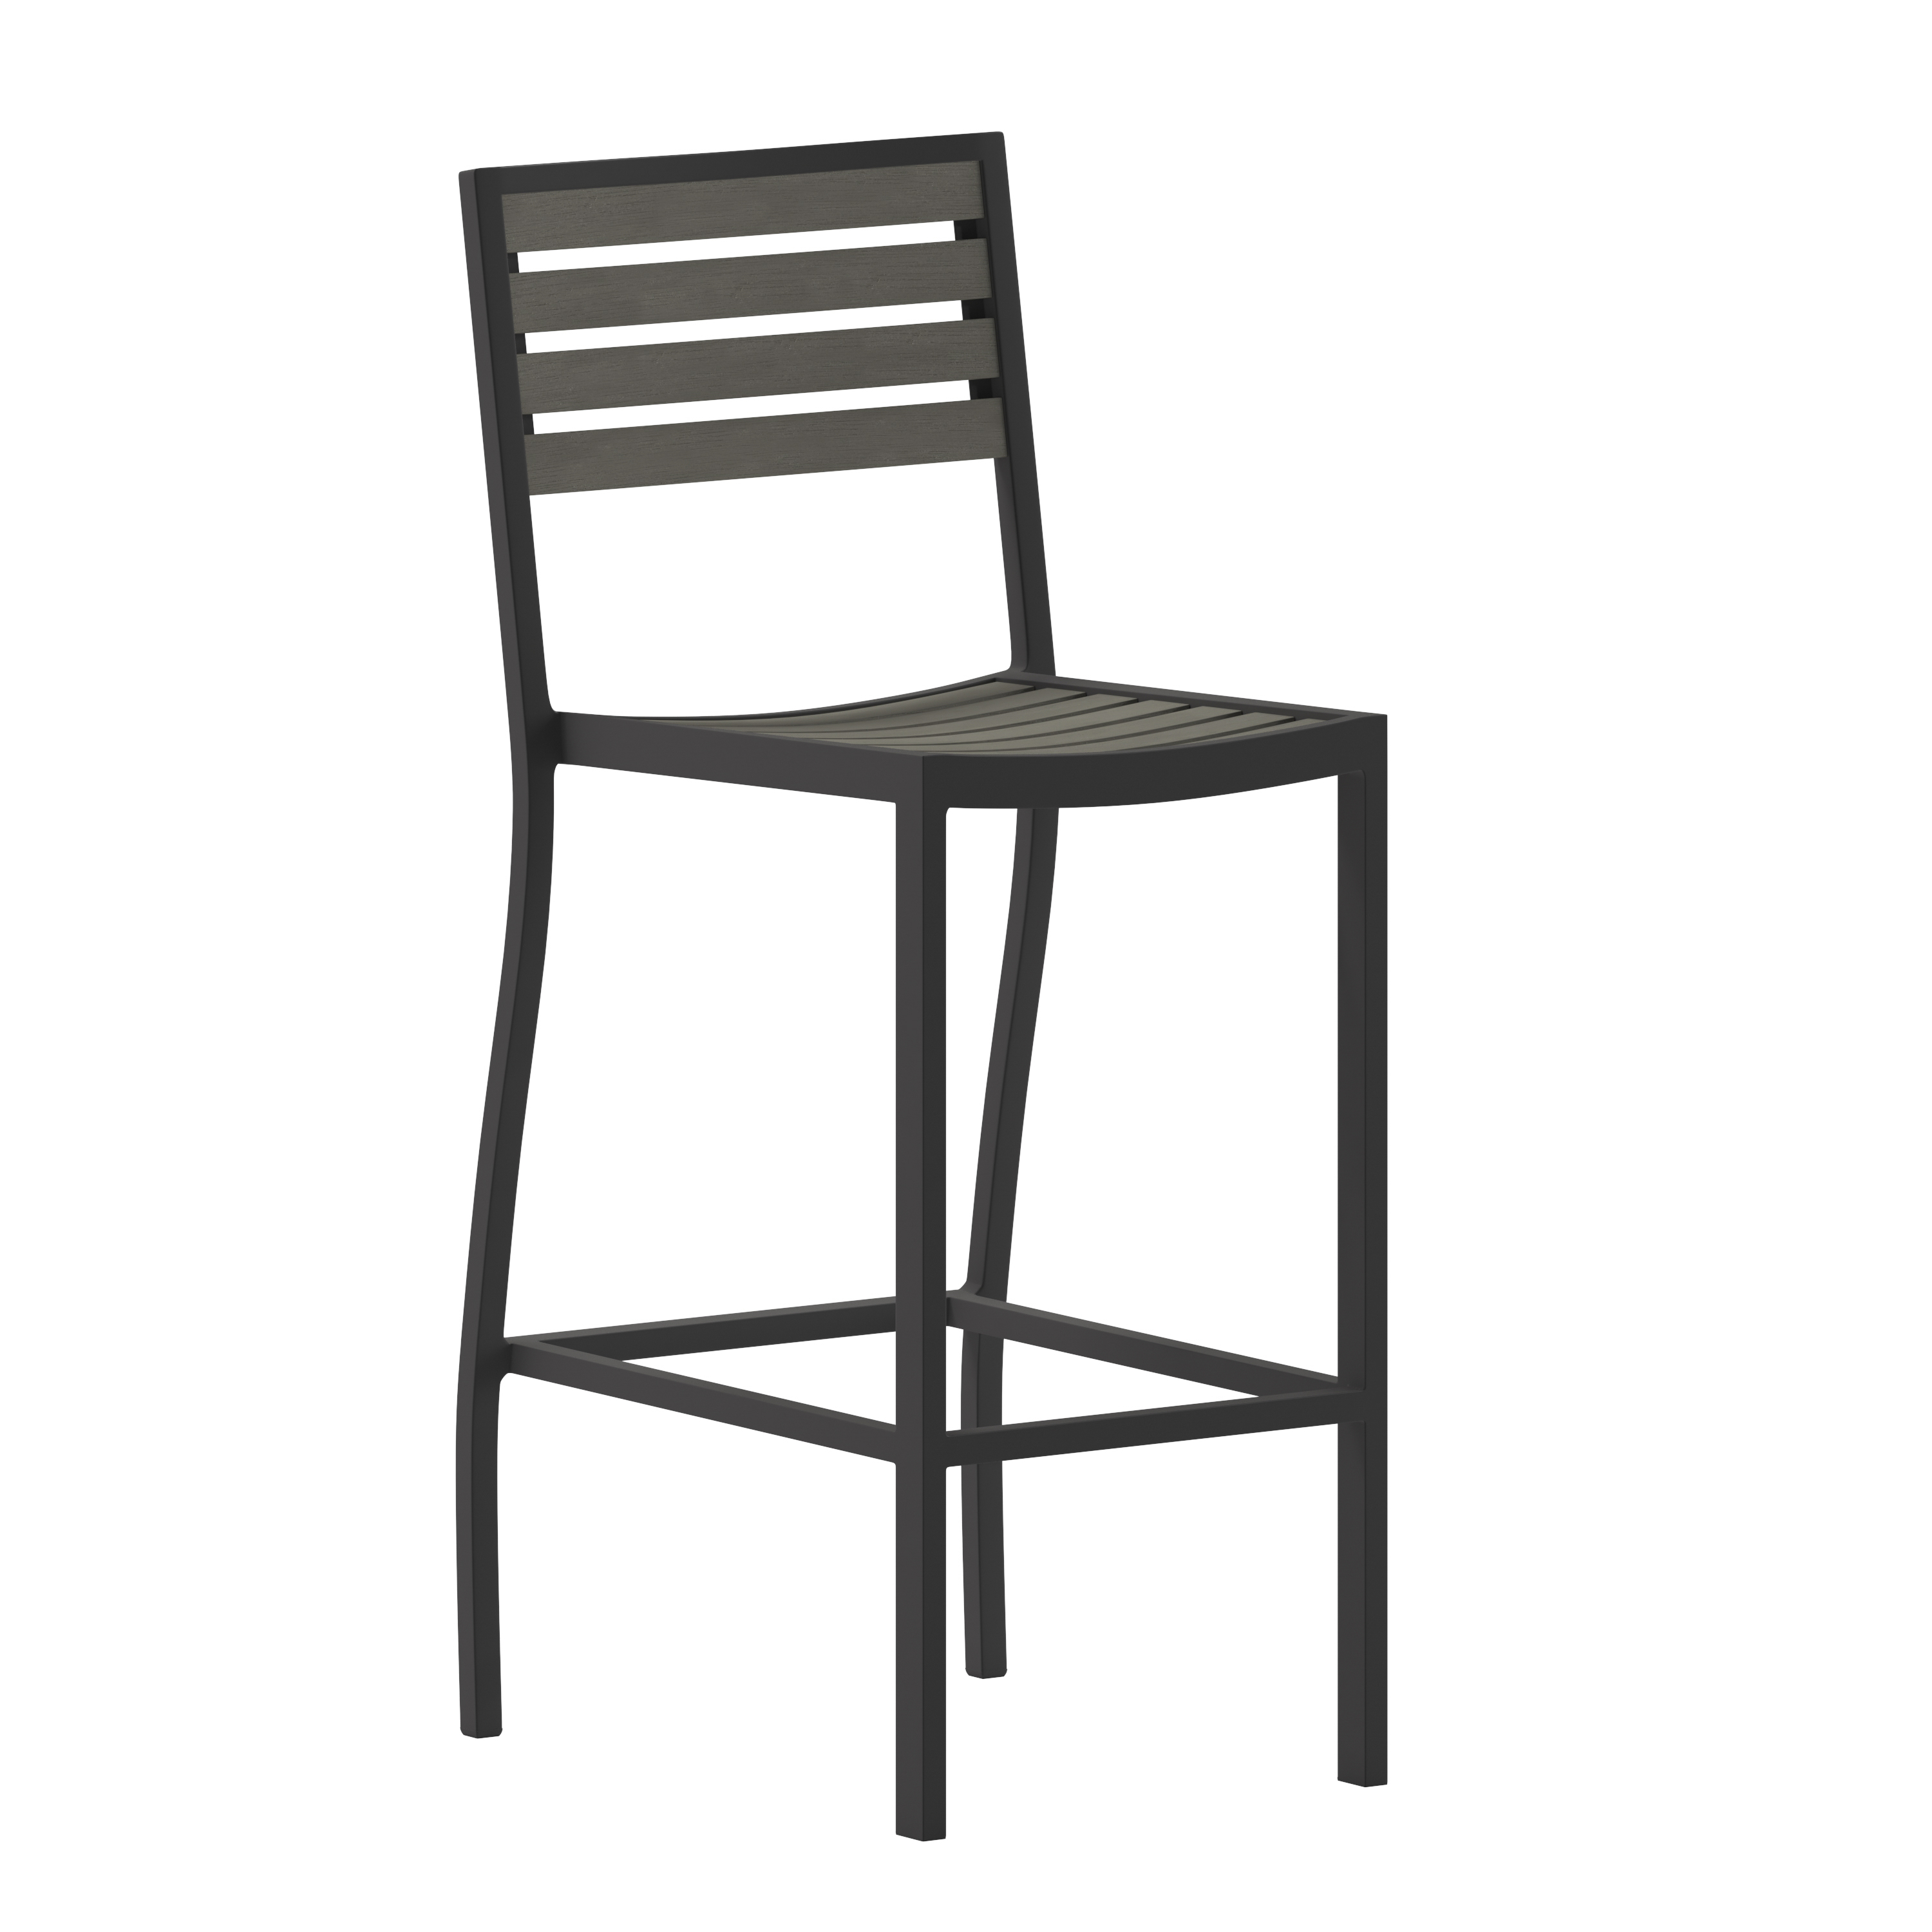 Flash Furniture XU-DG-HW6036B-GY-GG All-Weather Outdoor Bar Stool with Faux Wood Poly Resin Slats and Aluminum Frame, Gray Wash